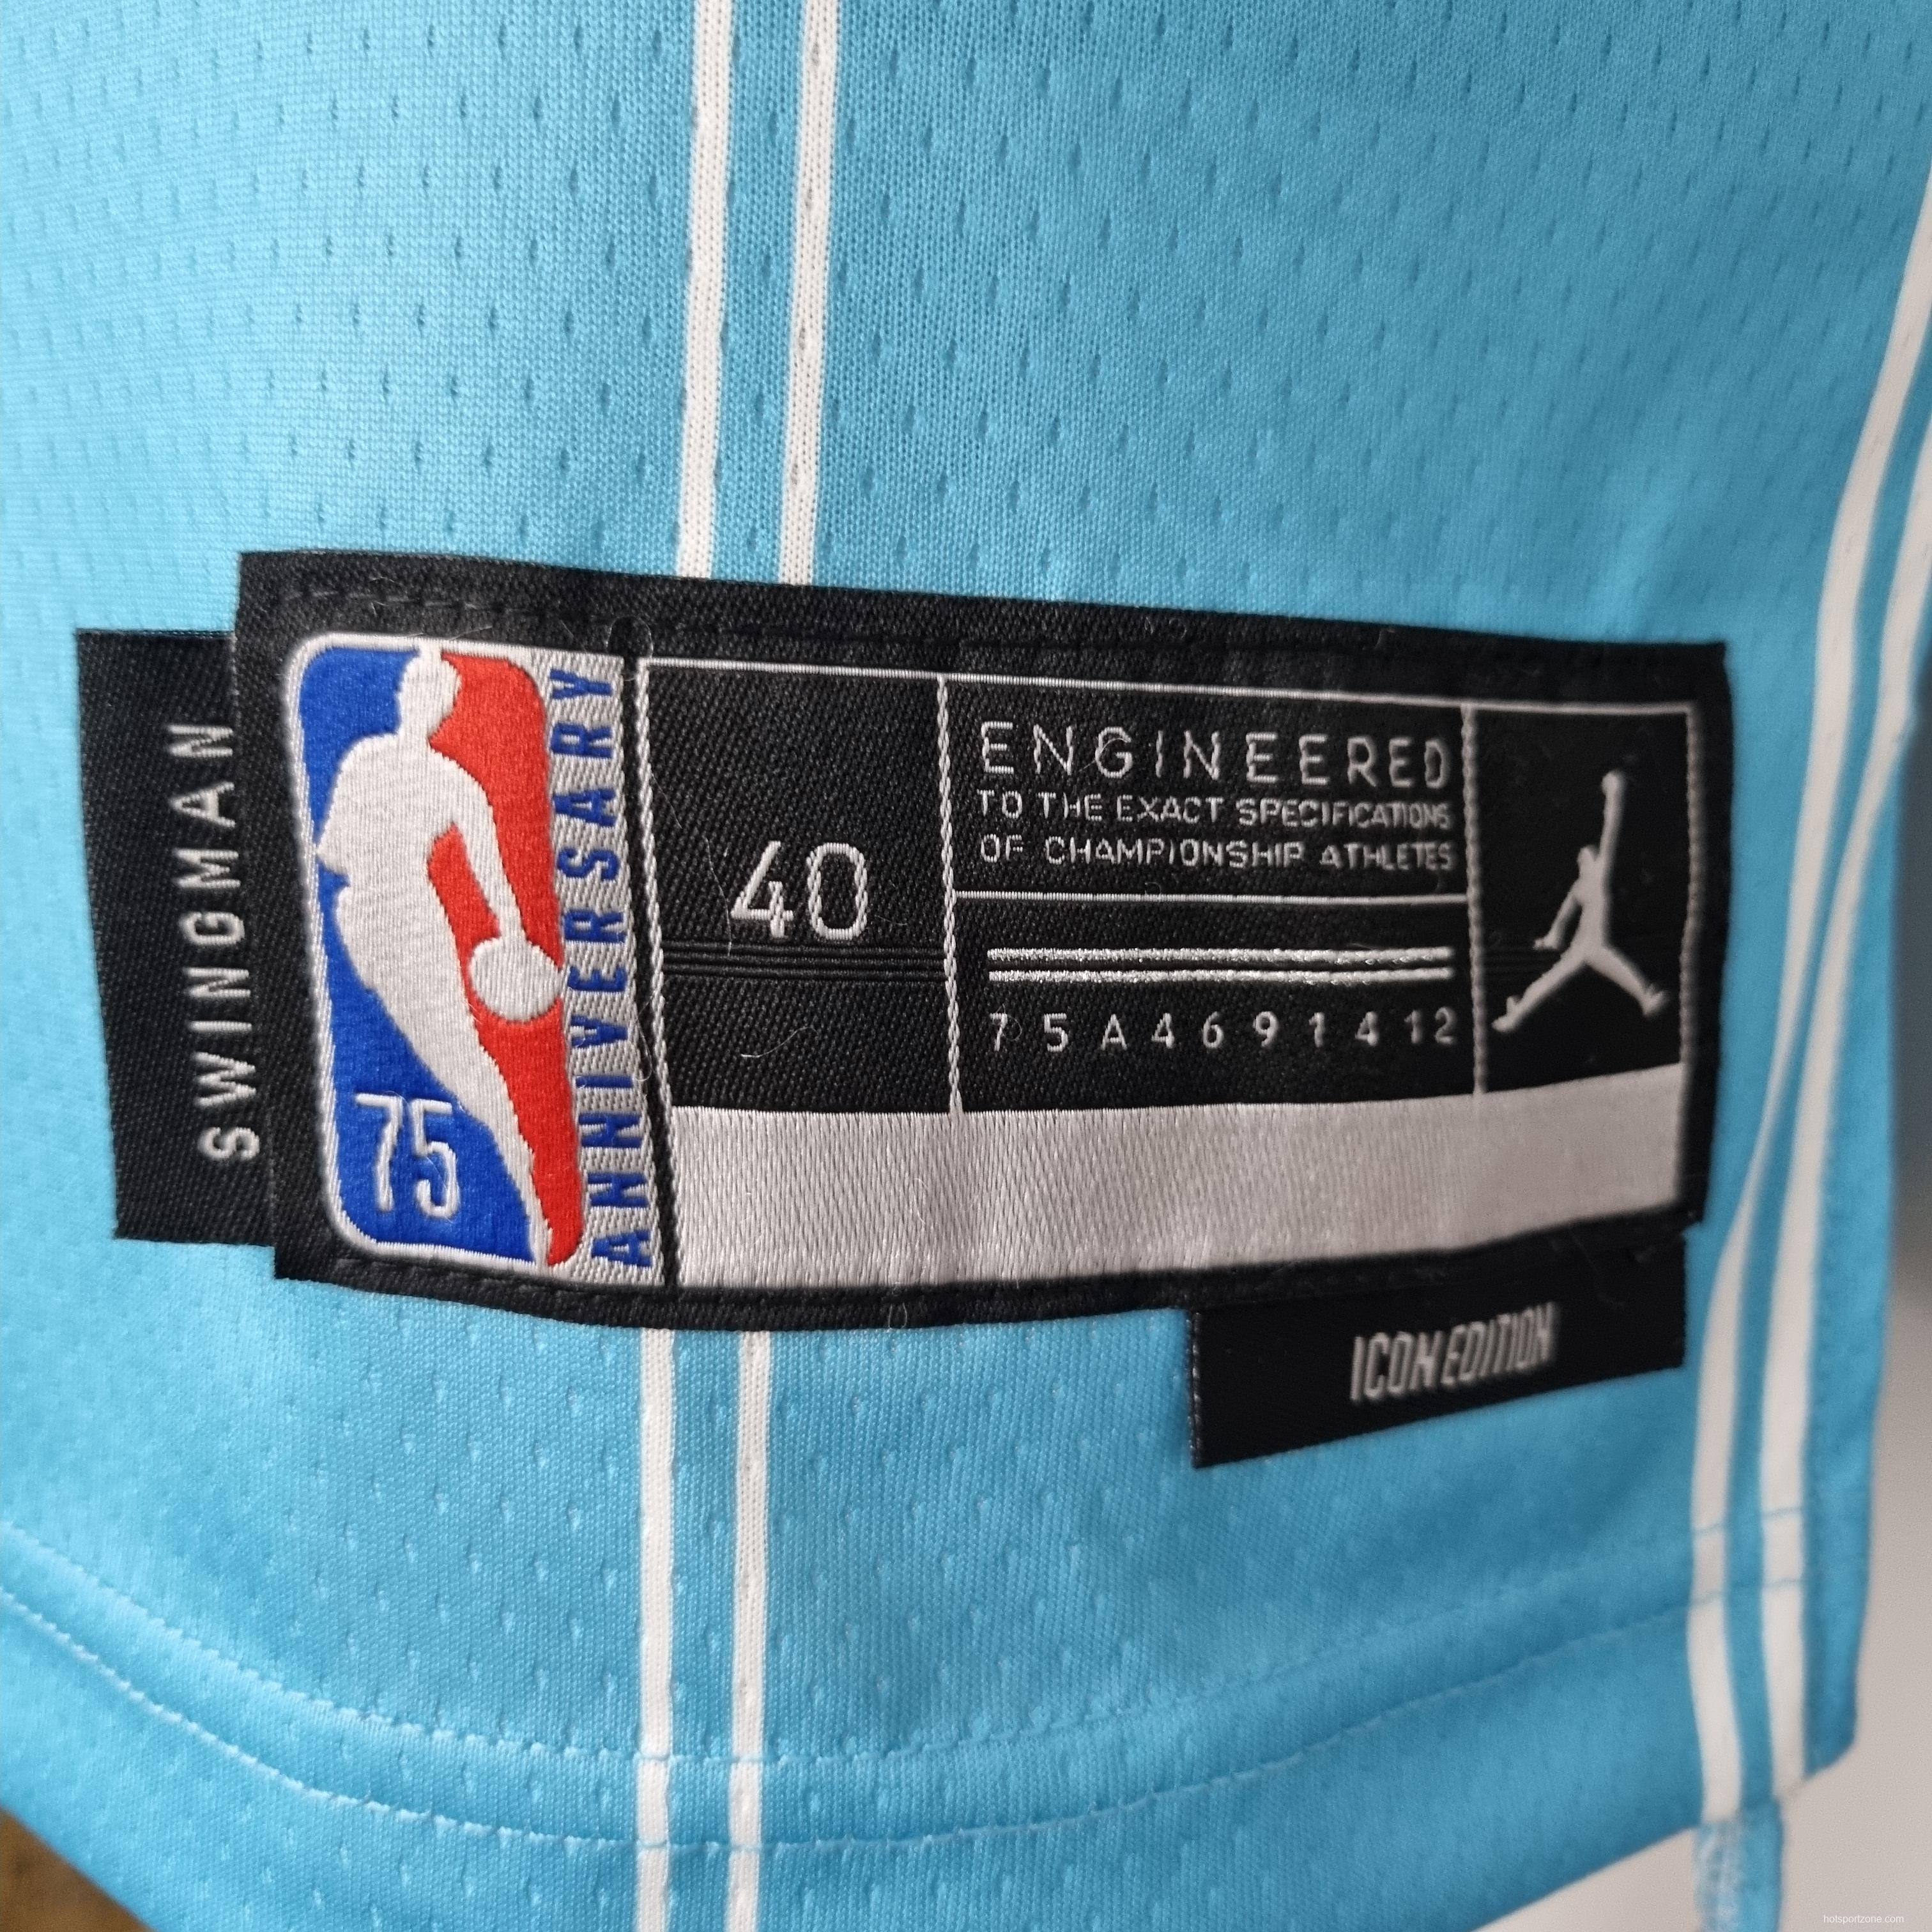 75th Anniversary Oubre jr.#12 Charlotte Hornets Blue NBA Jersey